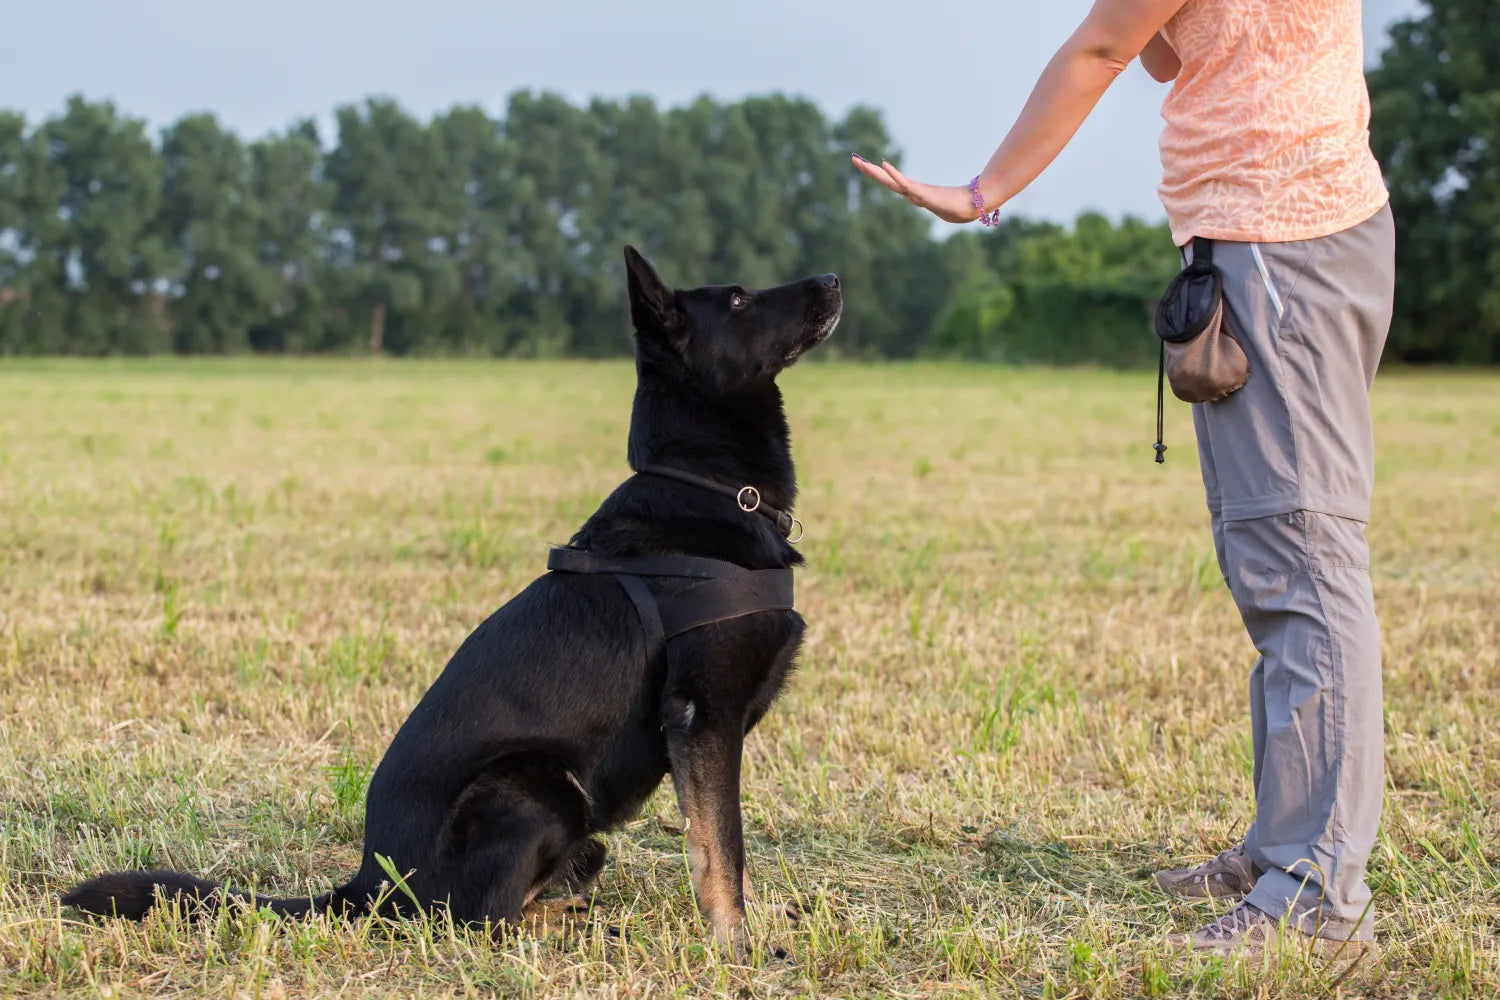 How to Train Your Older Dog to Heel | Wag!